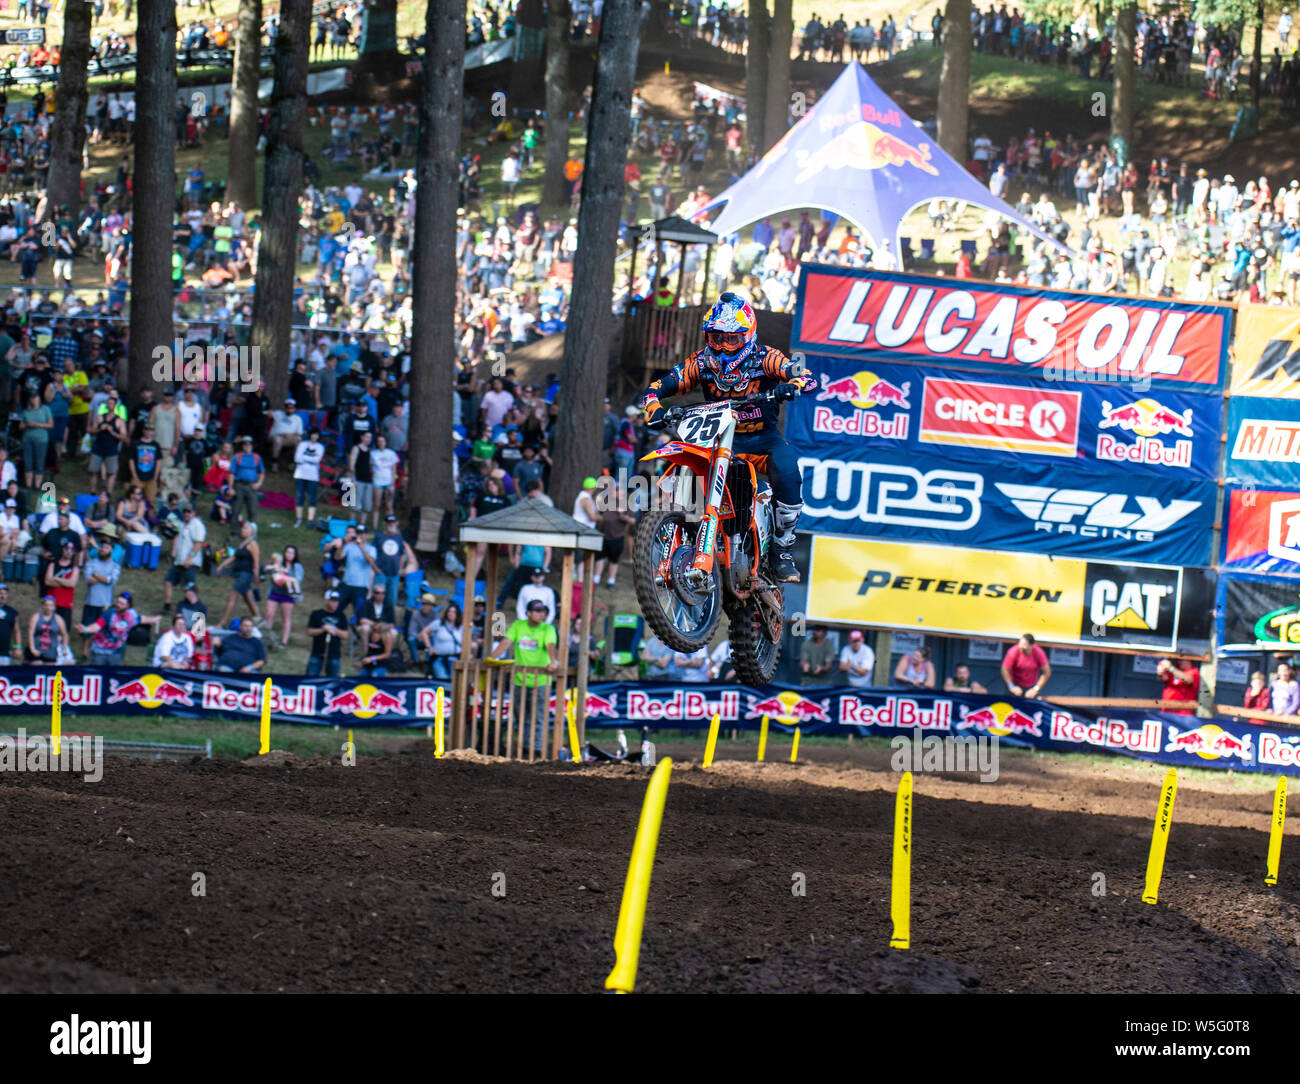 Washougal, WA USA. 27th July, 2019. # 25 Marvin Musqin gets air in the rhythm section during the Lucas Oil Pro Motocross Washougal National 450 class championship at Washougal MX park Washougal, WA Thurman James/CSM/Alamy Live News Stock Photo